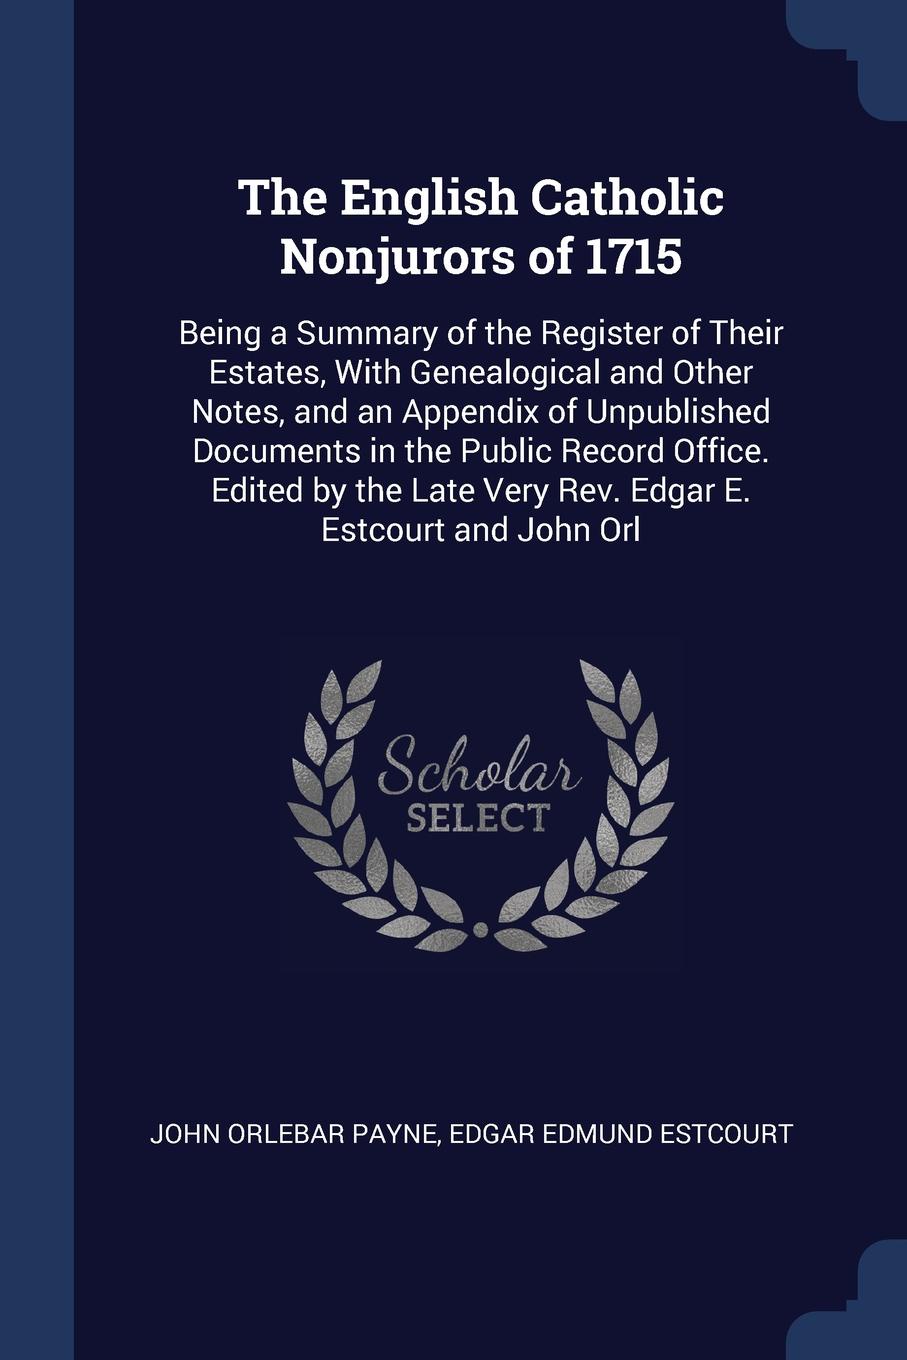 The English Catholic Nonjurors of 1715. Being a Summary of the Register of Their Estates, With Genealogical and Other Notes, and an Appendix of Unpublished Documents in the Public Record Office. Edited by the Late Very Rev. Edgar E. Estcourt and J...